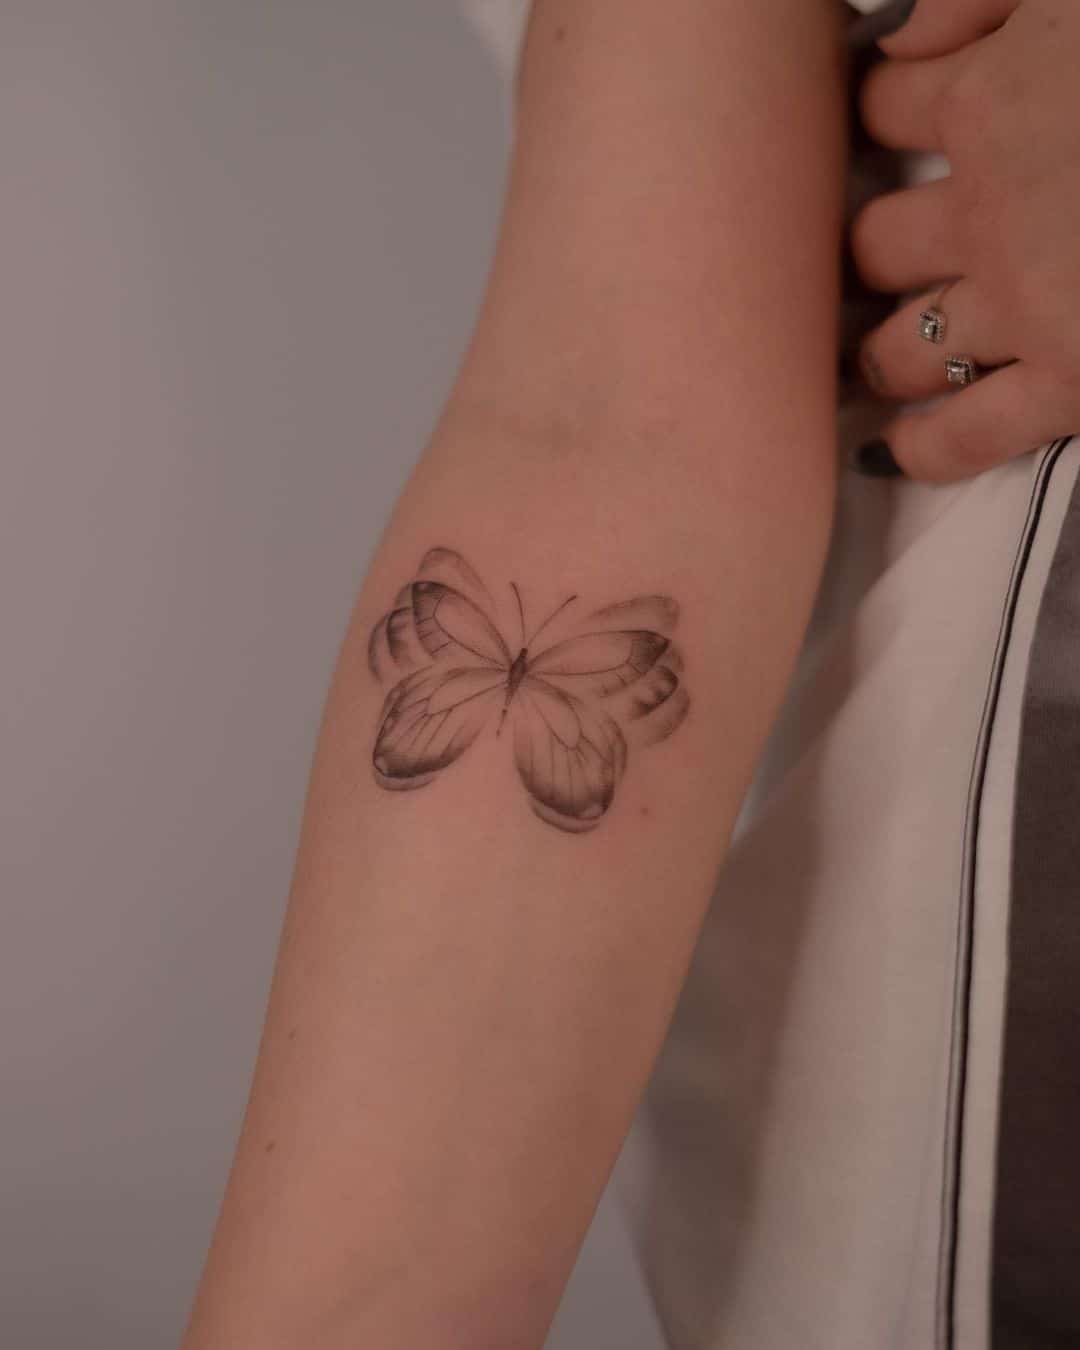 Butterfly tattoo on arm by